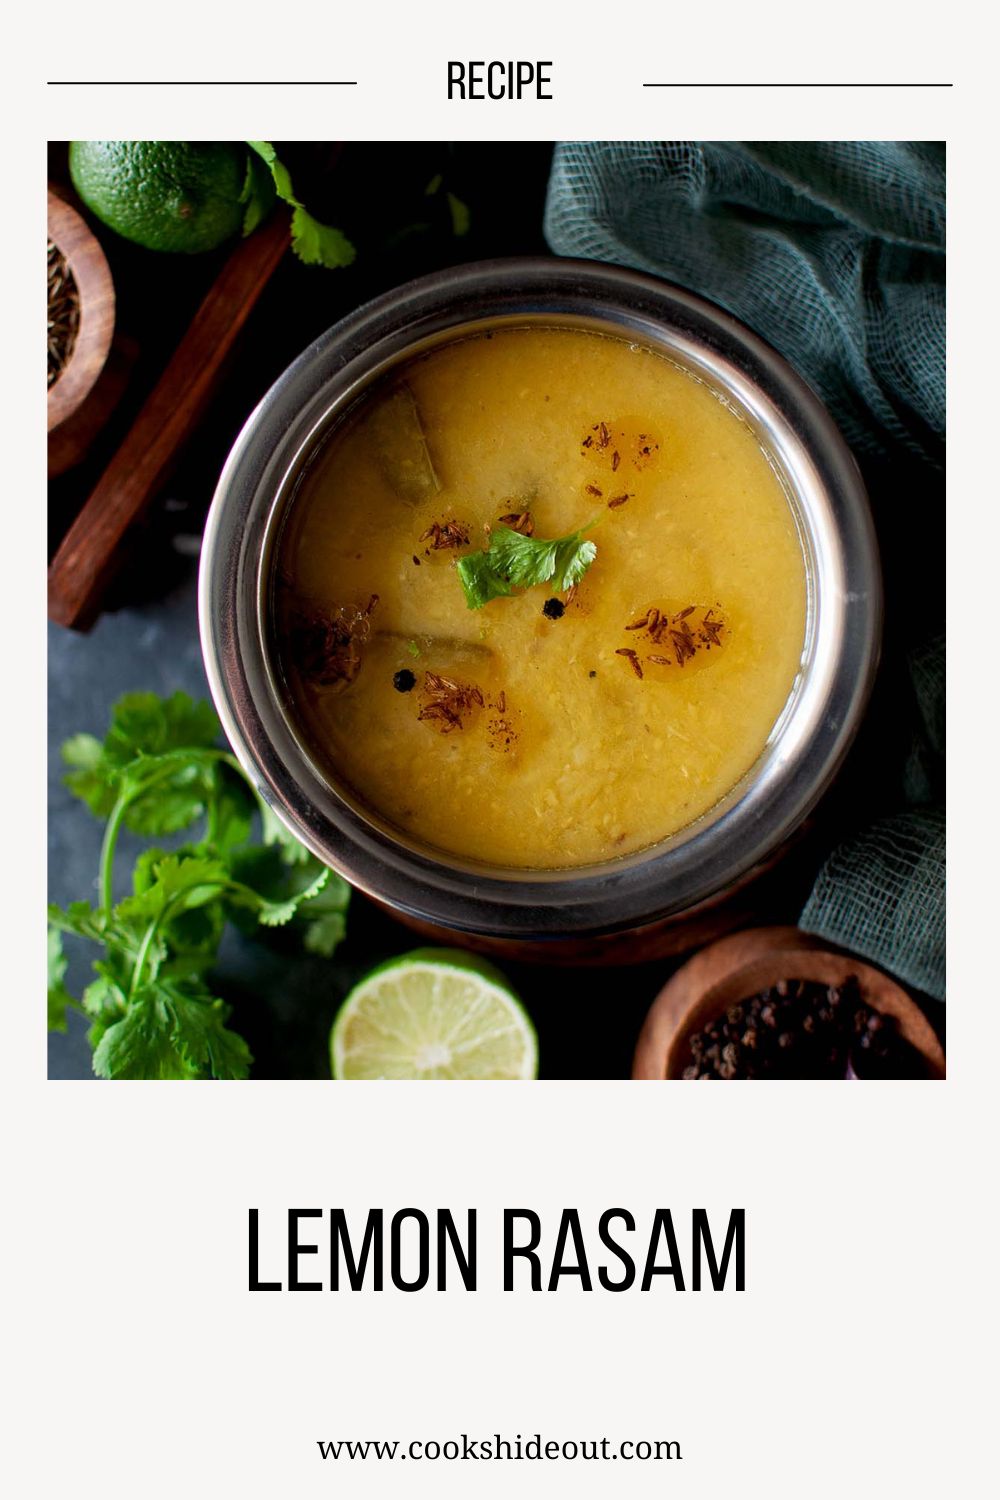 Top view of a steel bowl with lemon rasam.